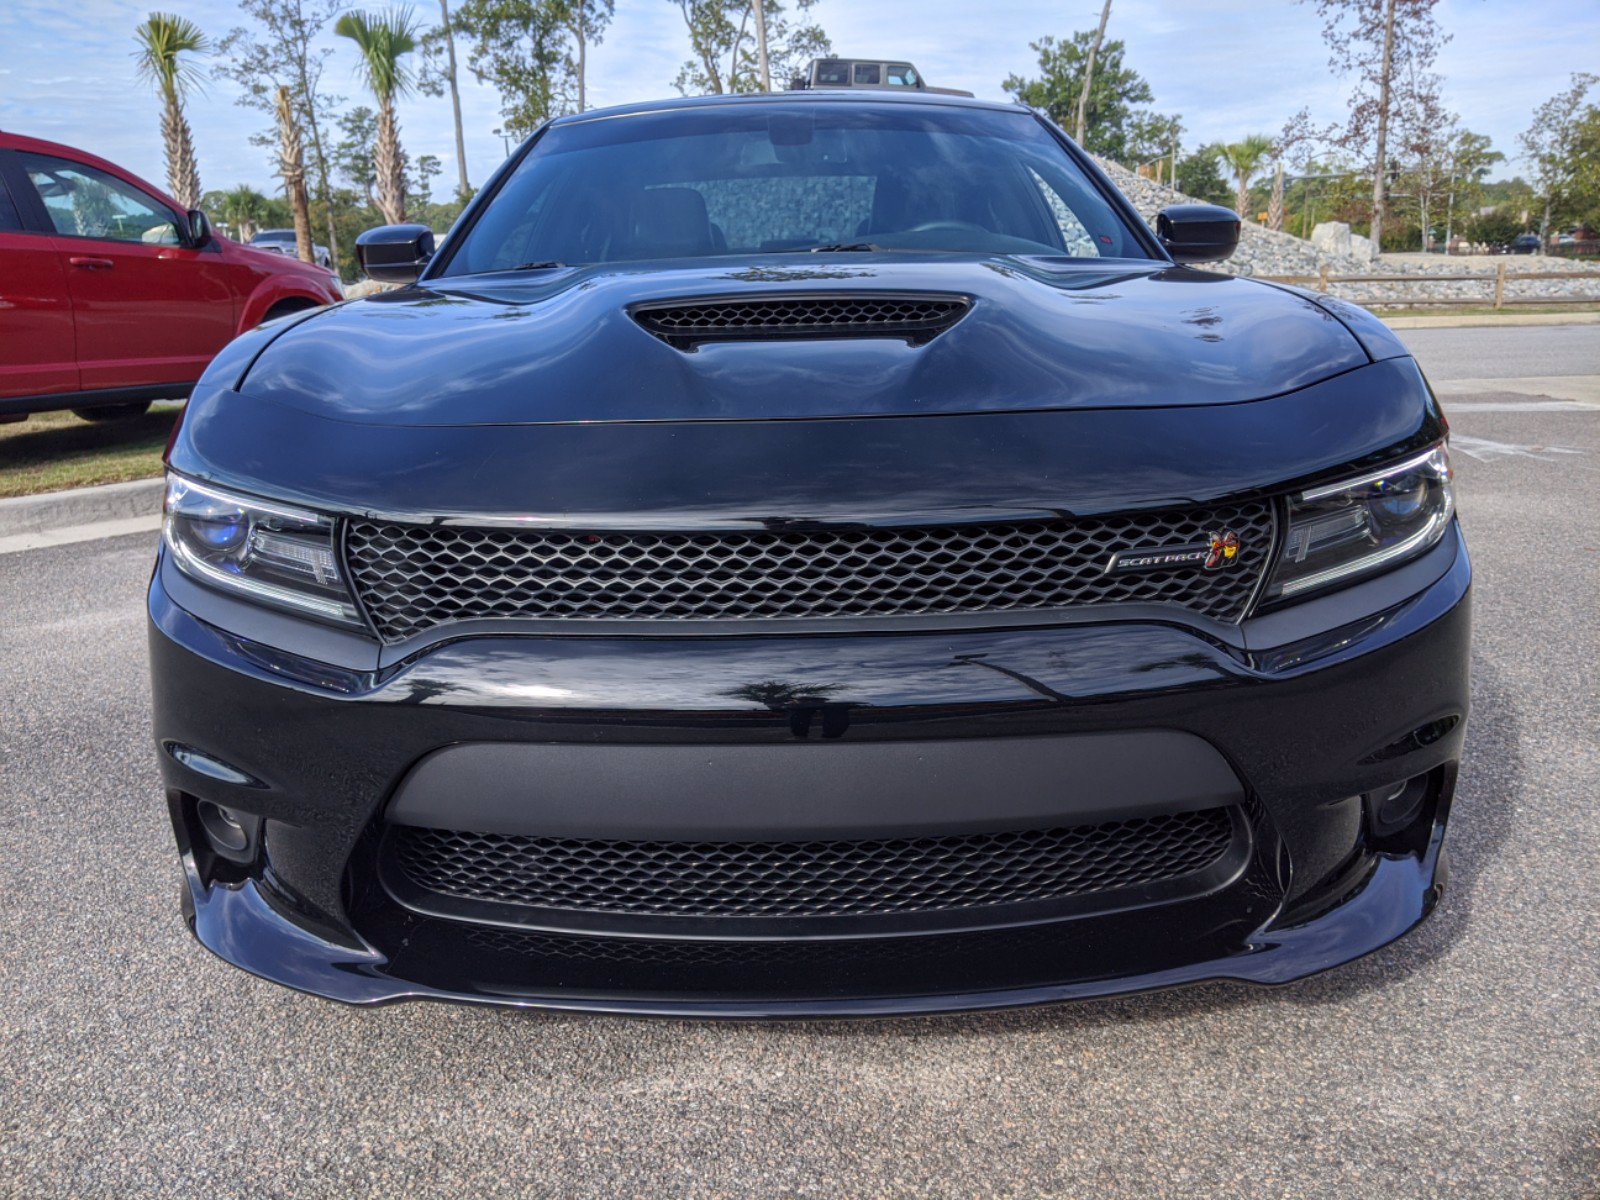 Pre-Owned 2018 Dodge Charger R/T Scat Pack 4dr Car in Fort Walton Beach ...